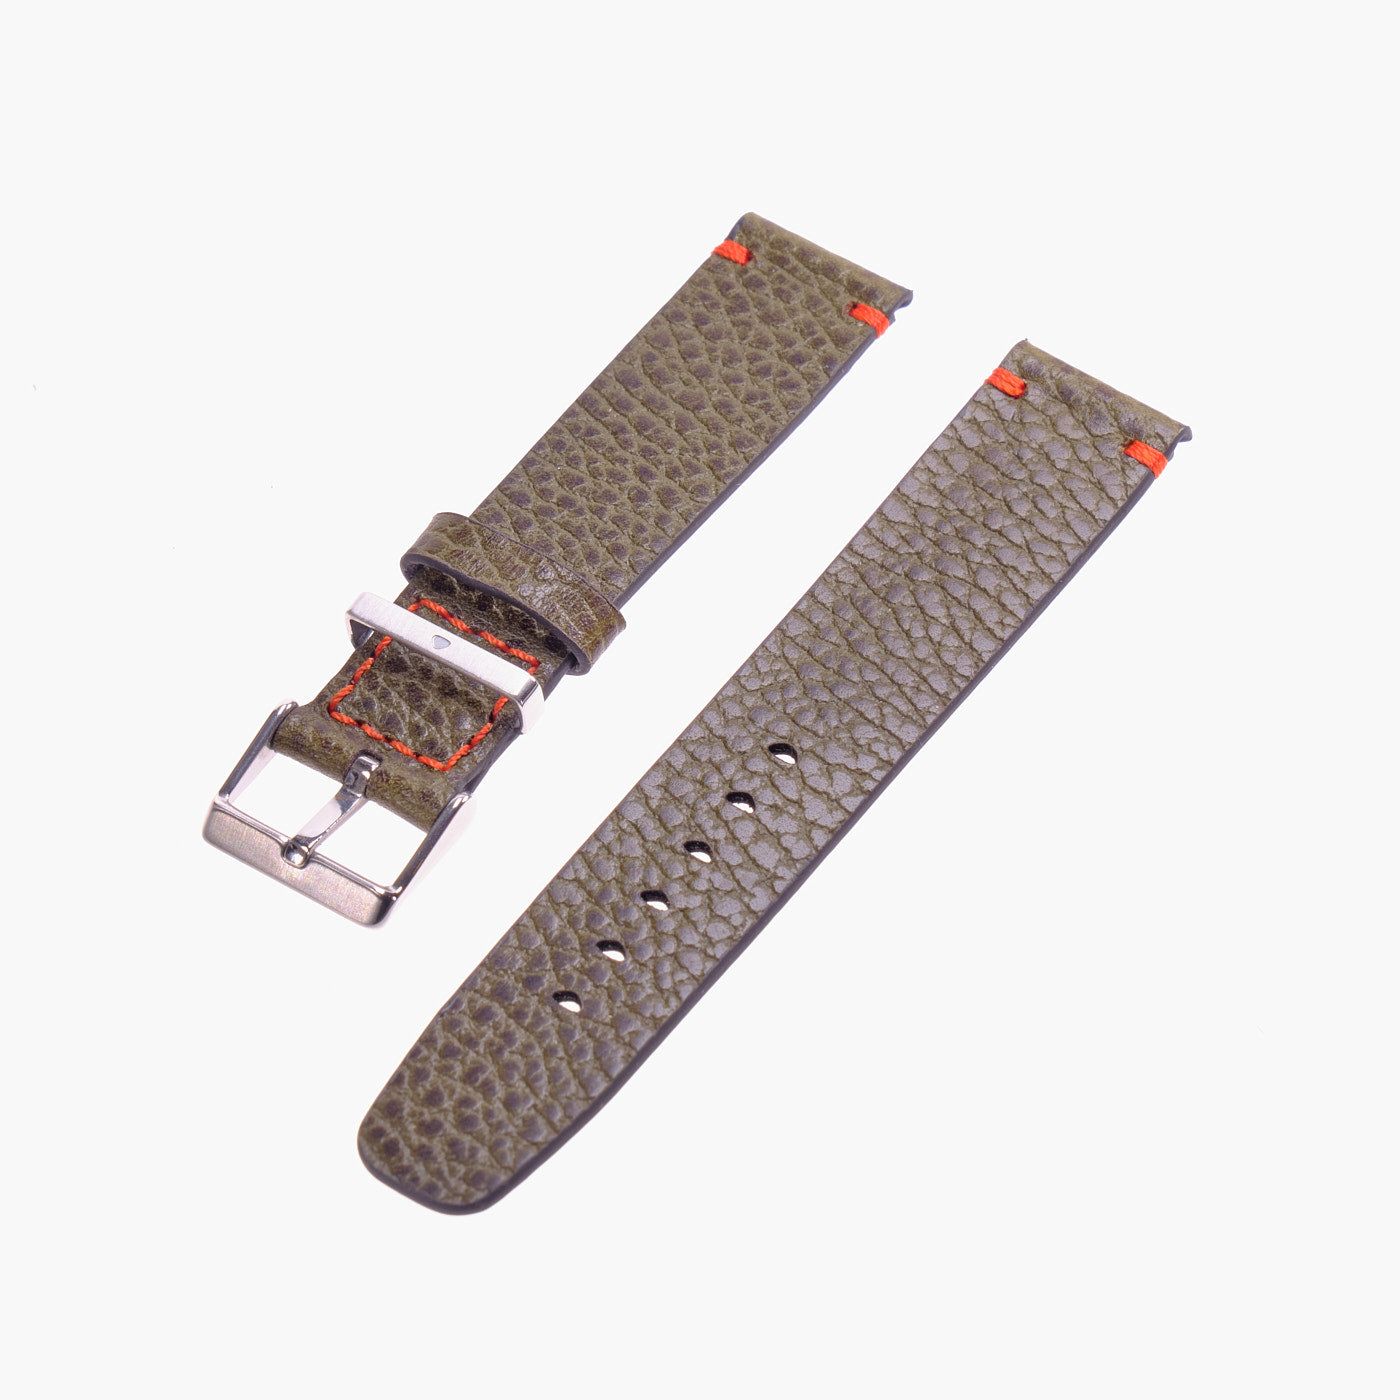 № 1223 TL - Classic Watch Straps